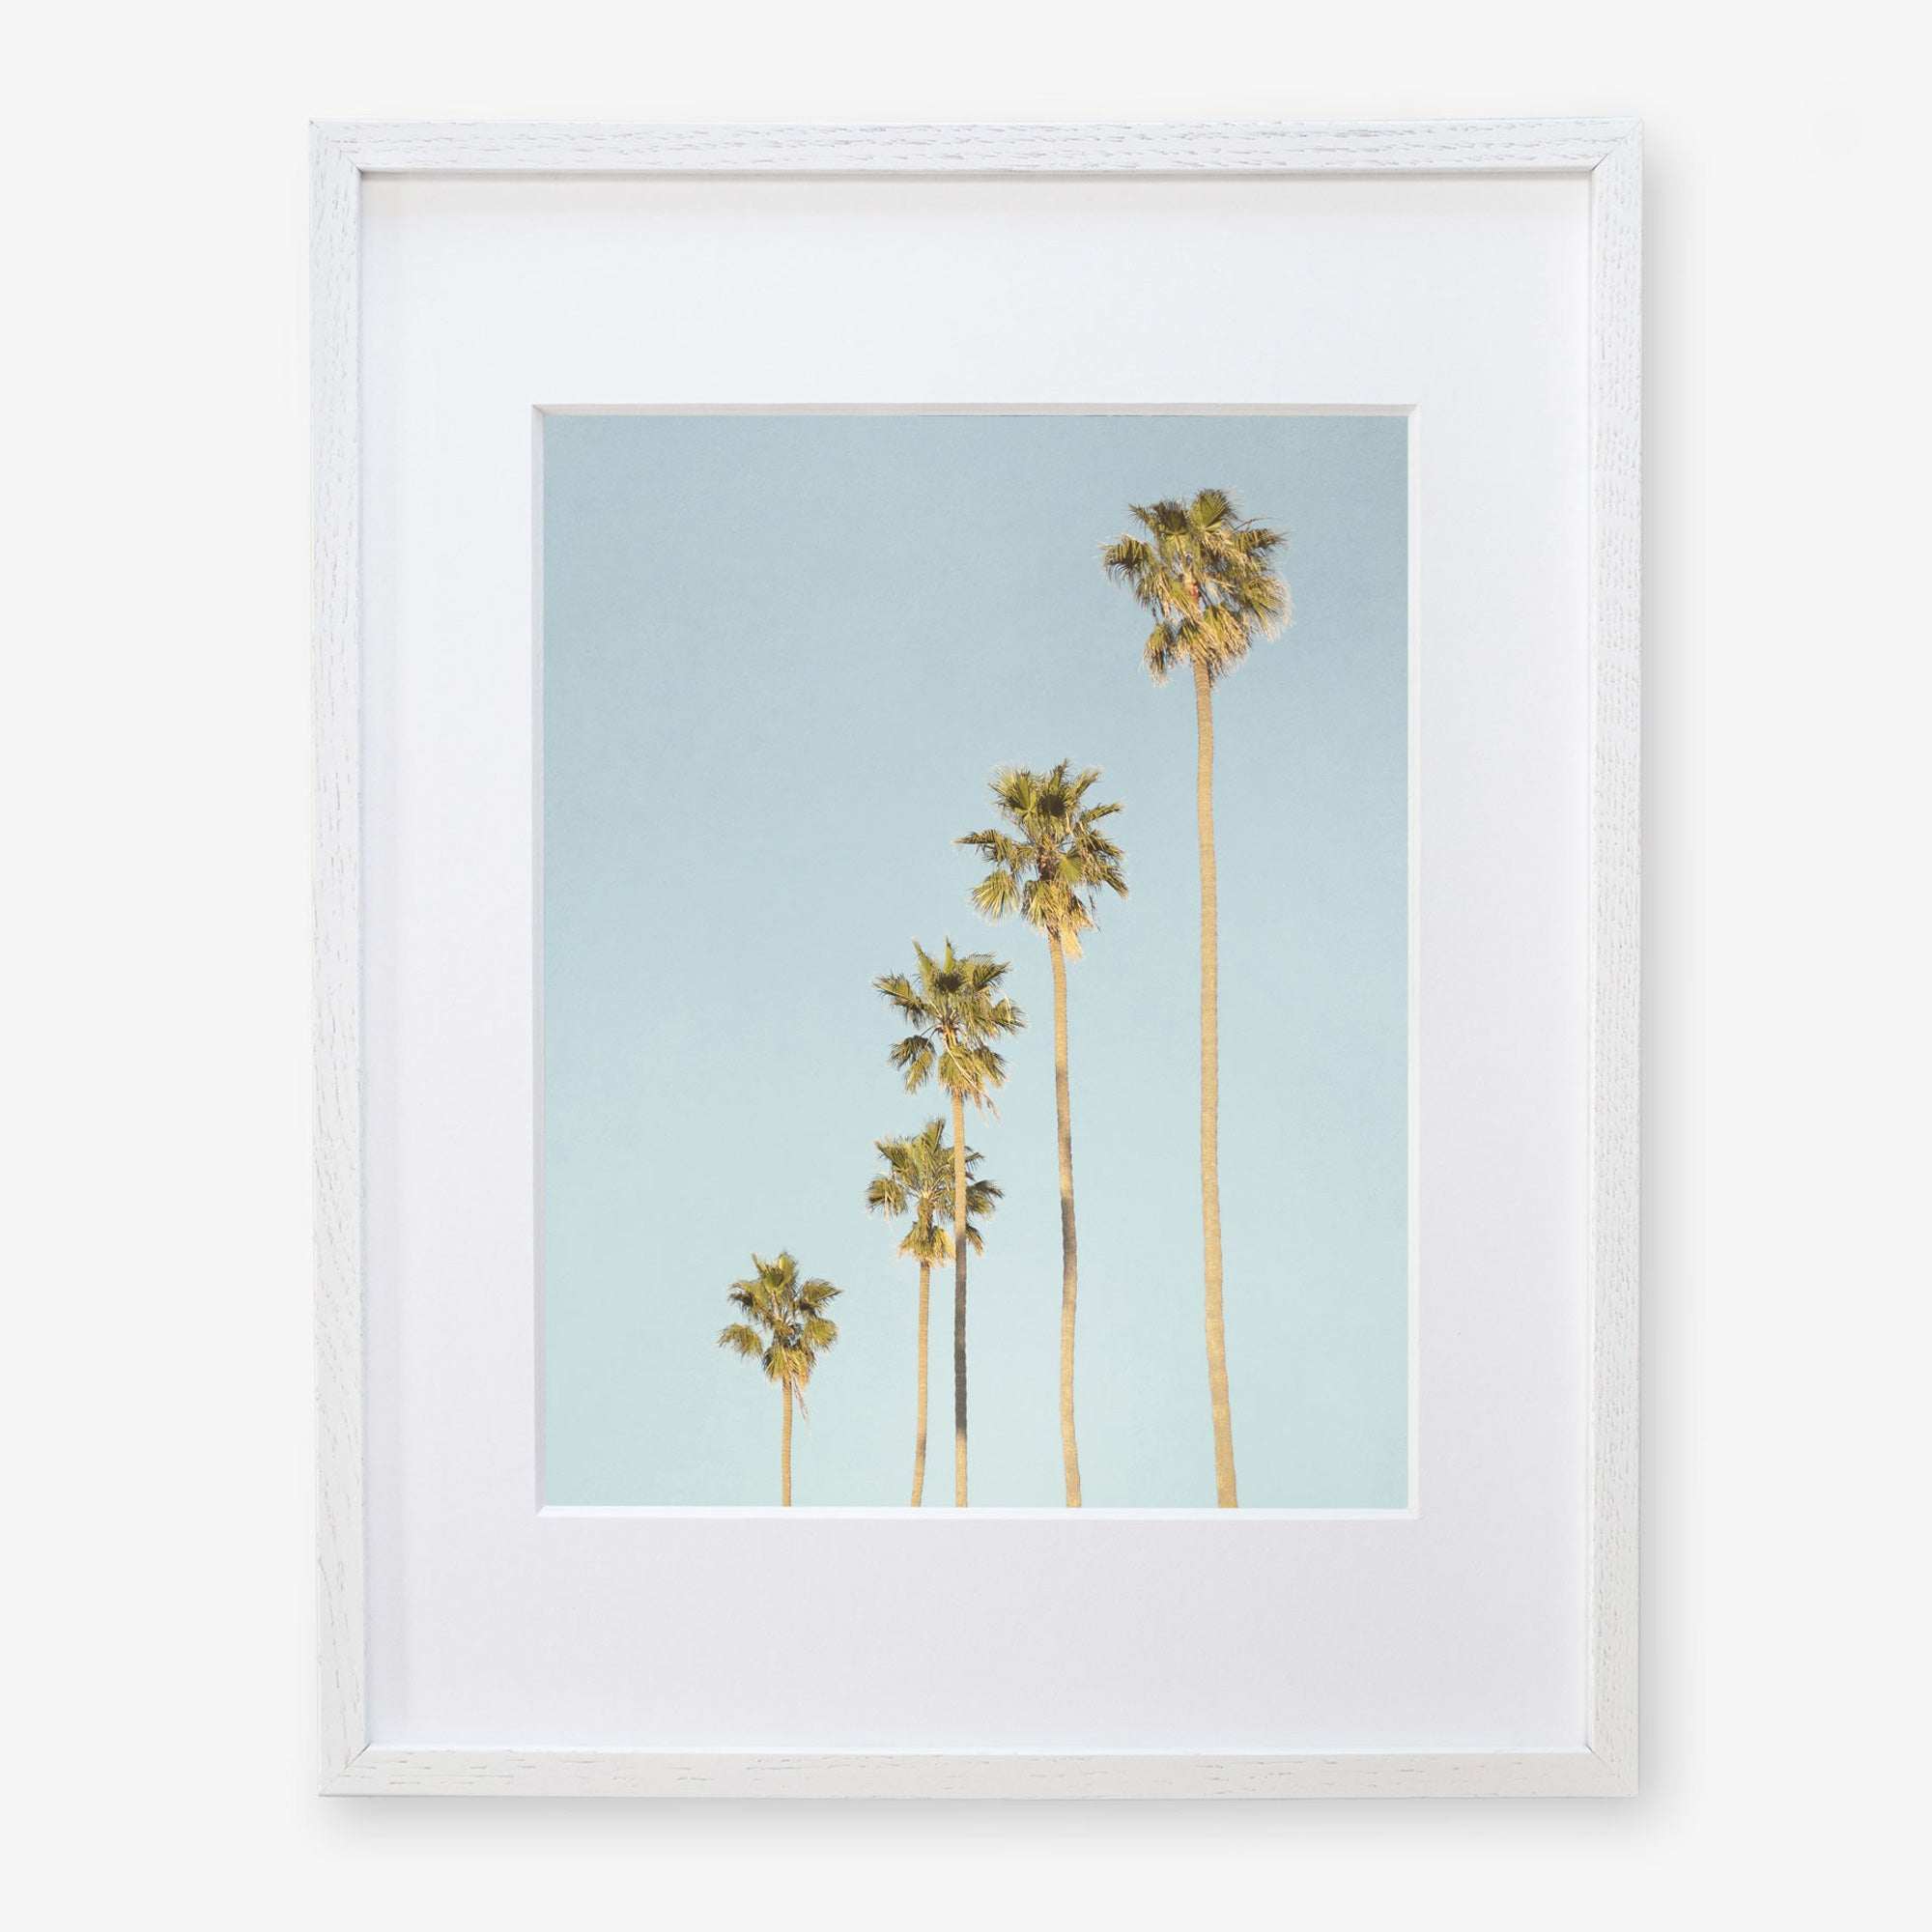 Framed photograph of a group of tall palm trees against a clear blue sky, depicted in a simple white frame, capturing the essence of California style - Offley Green&#39;s Los Angeles Palm Tree Photographic Print &#39;Palm Tree Steps&#39;.